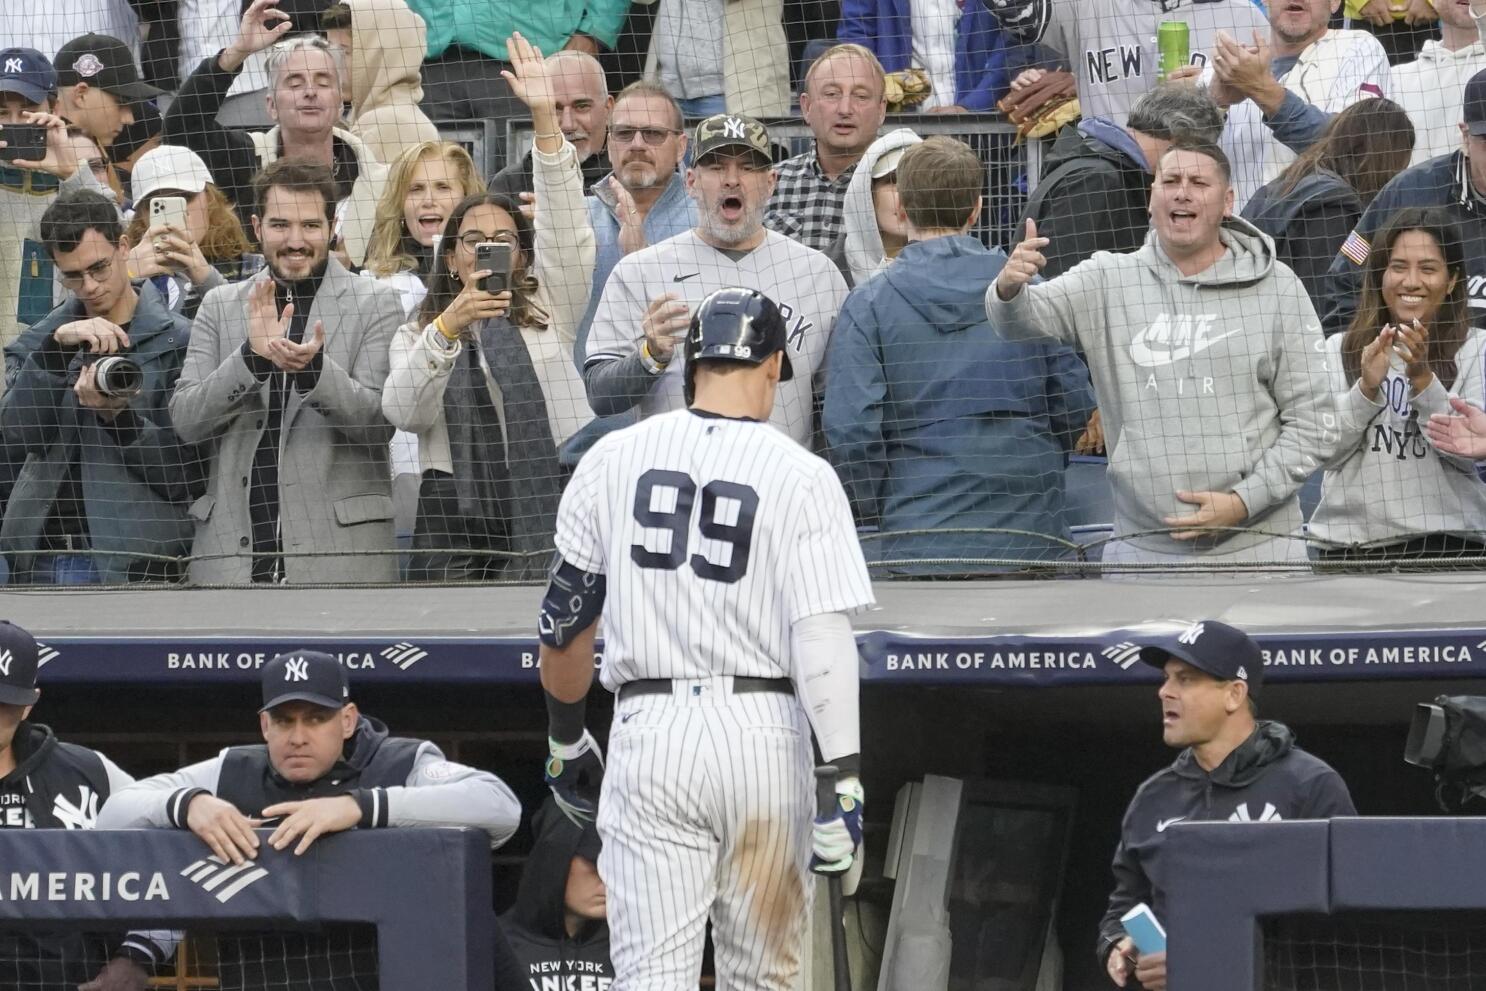 Judge stays at 61 homers on 61st anniversary of Maris' 61st